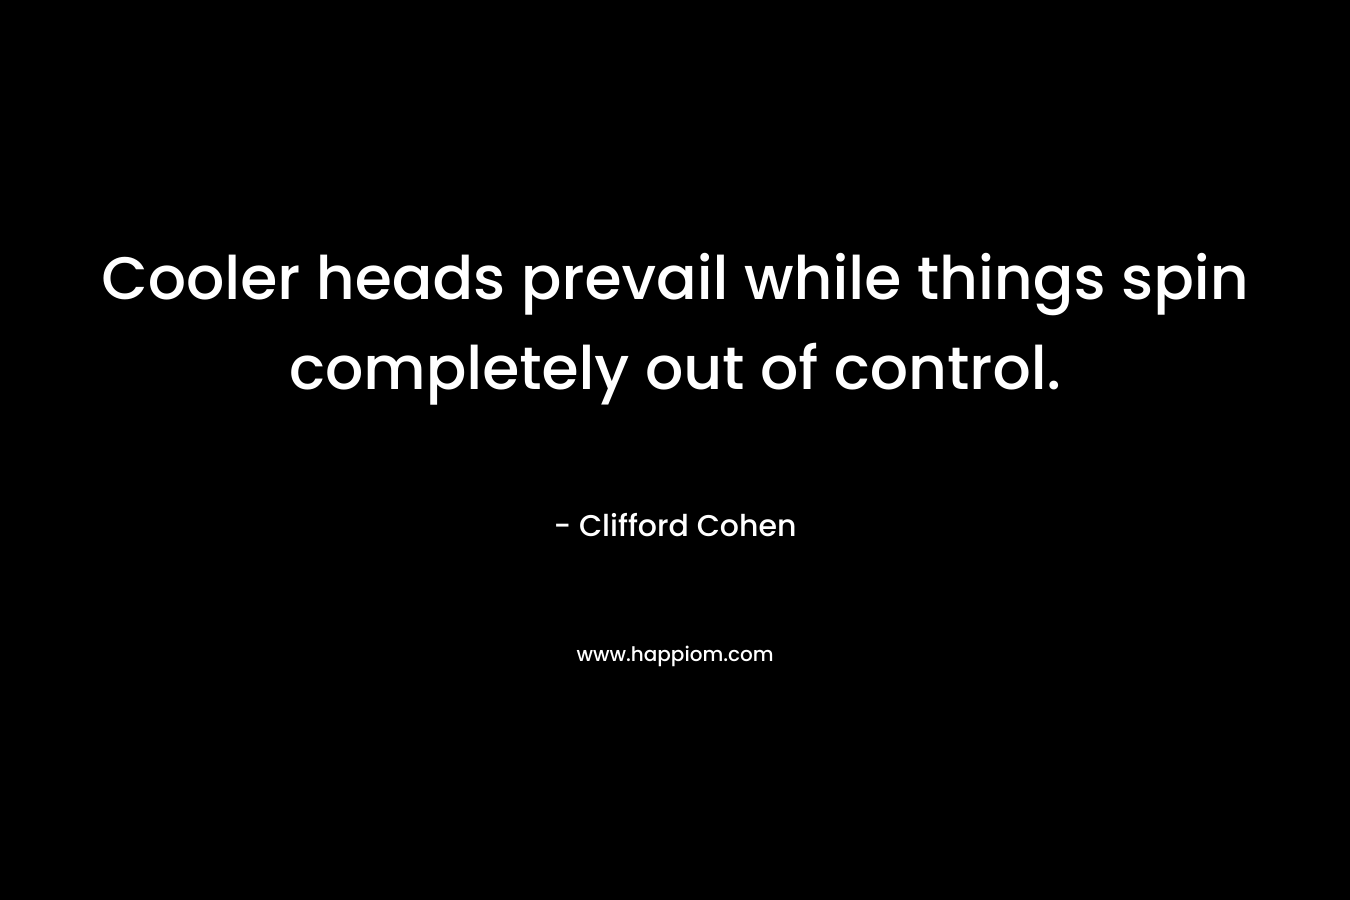 Cooler heads prevail while things spin completely out of control. – Clifford Cohen